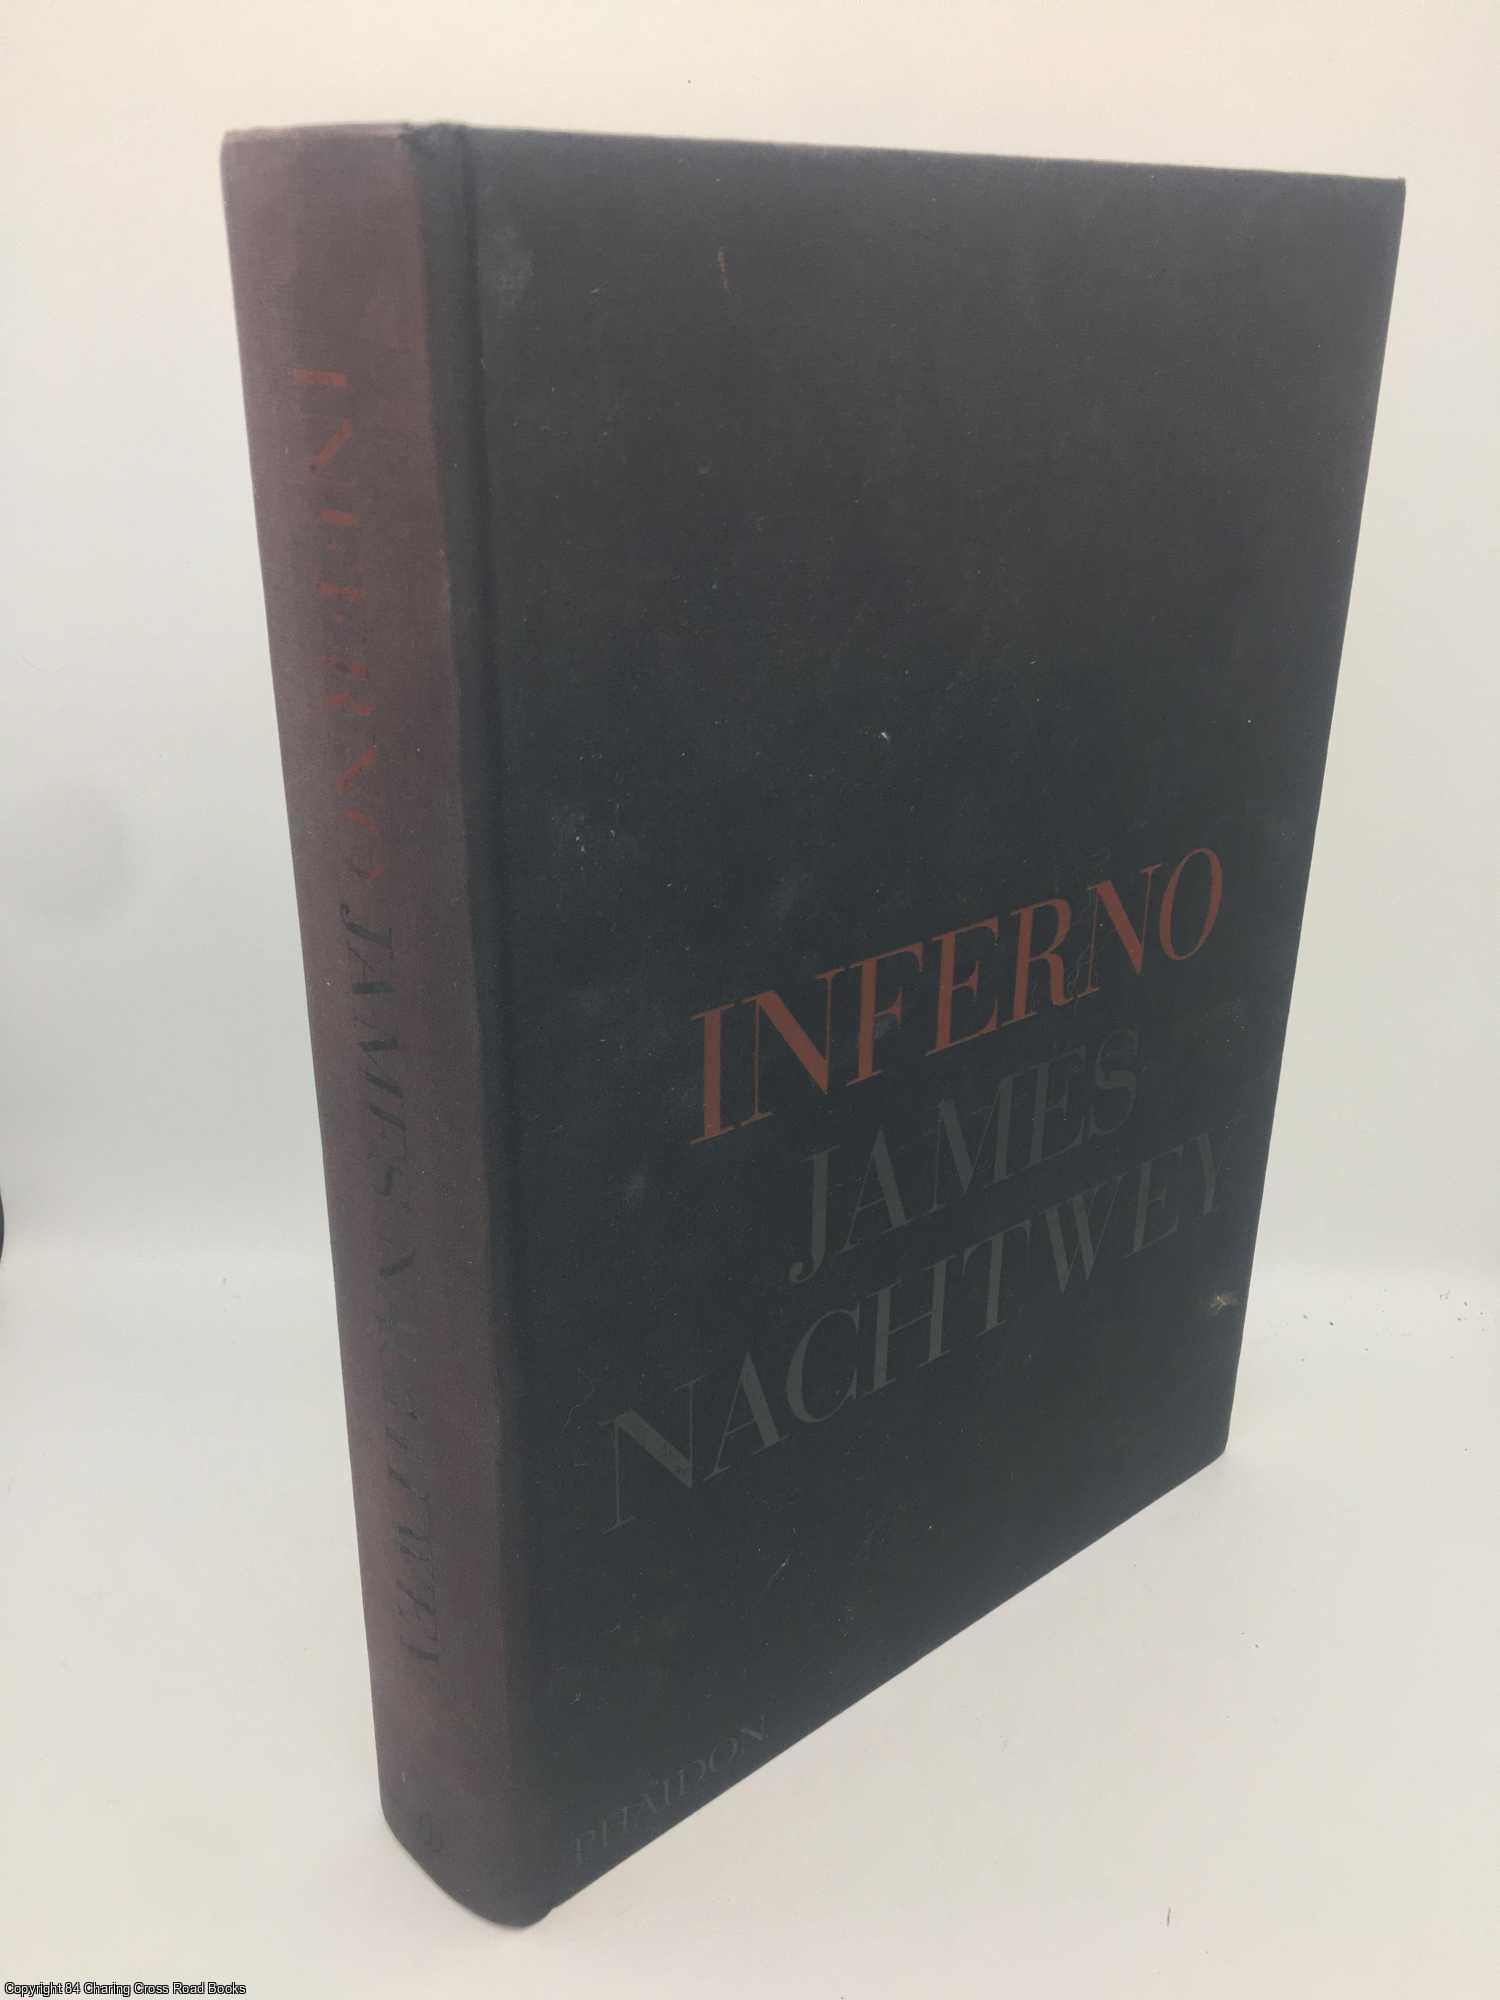 Inferno by James Nachtwey on 84 Charing Cross Rare Books